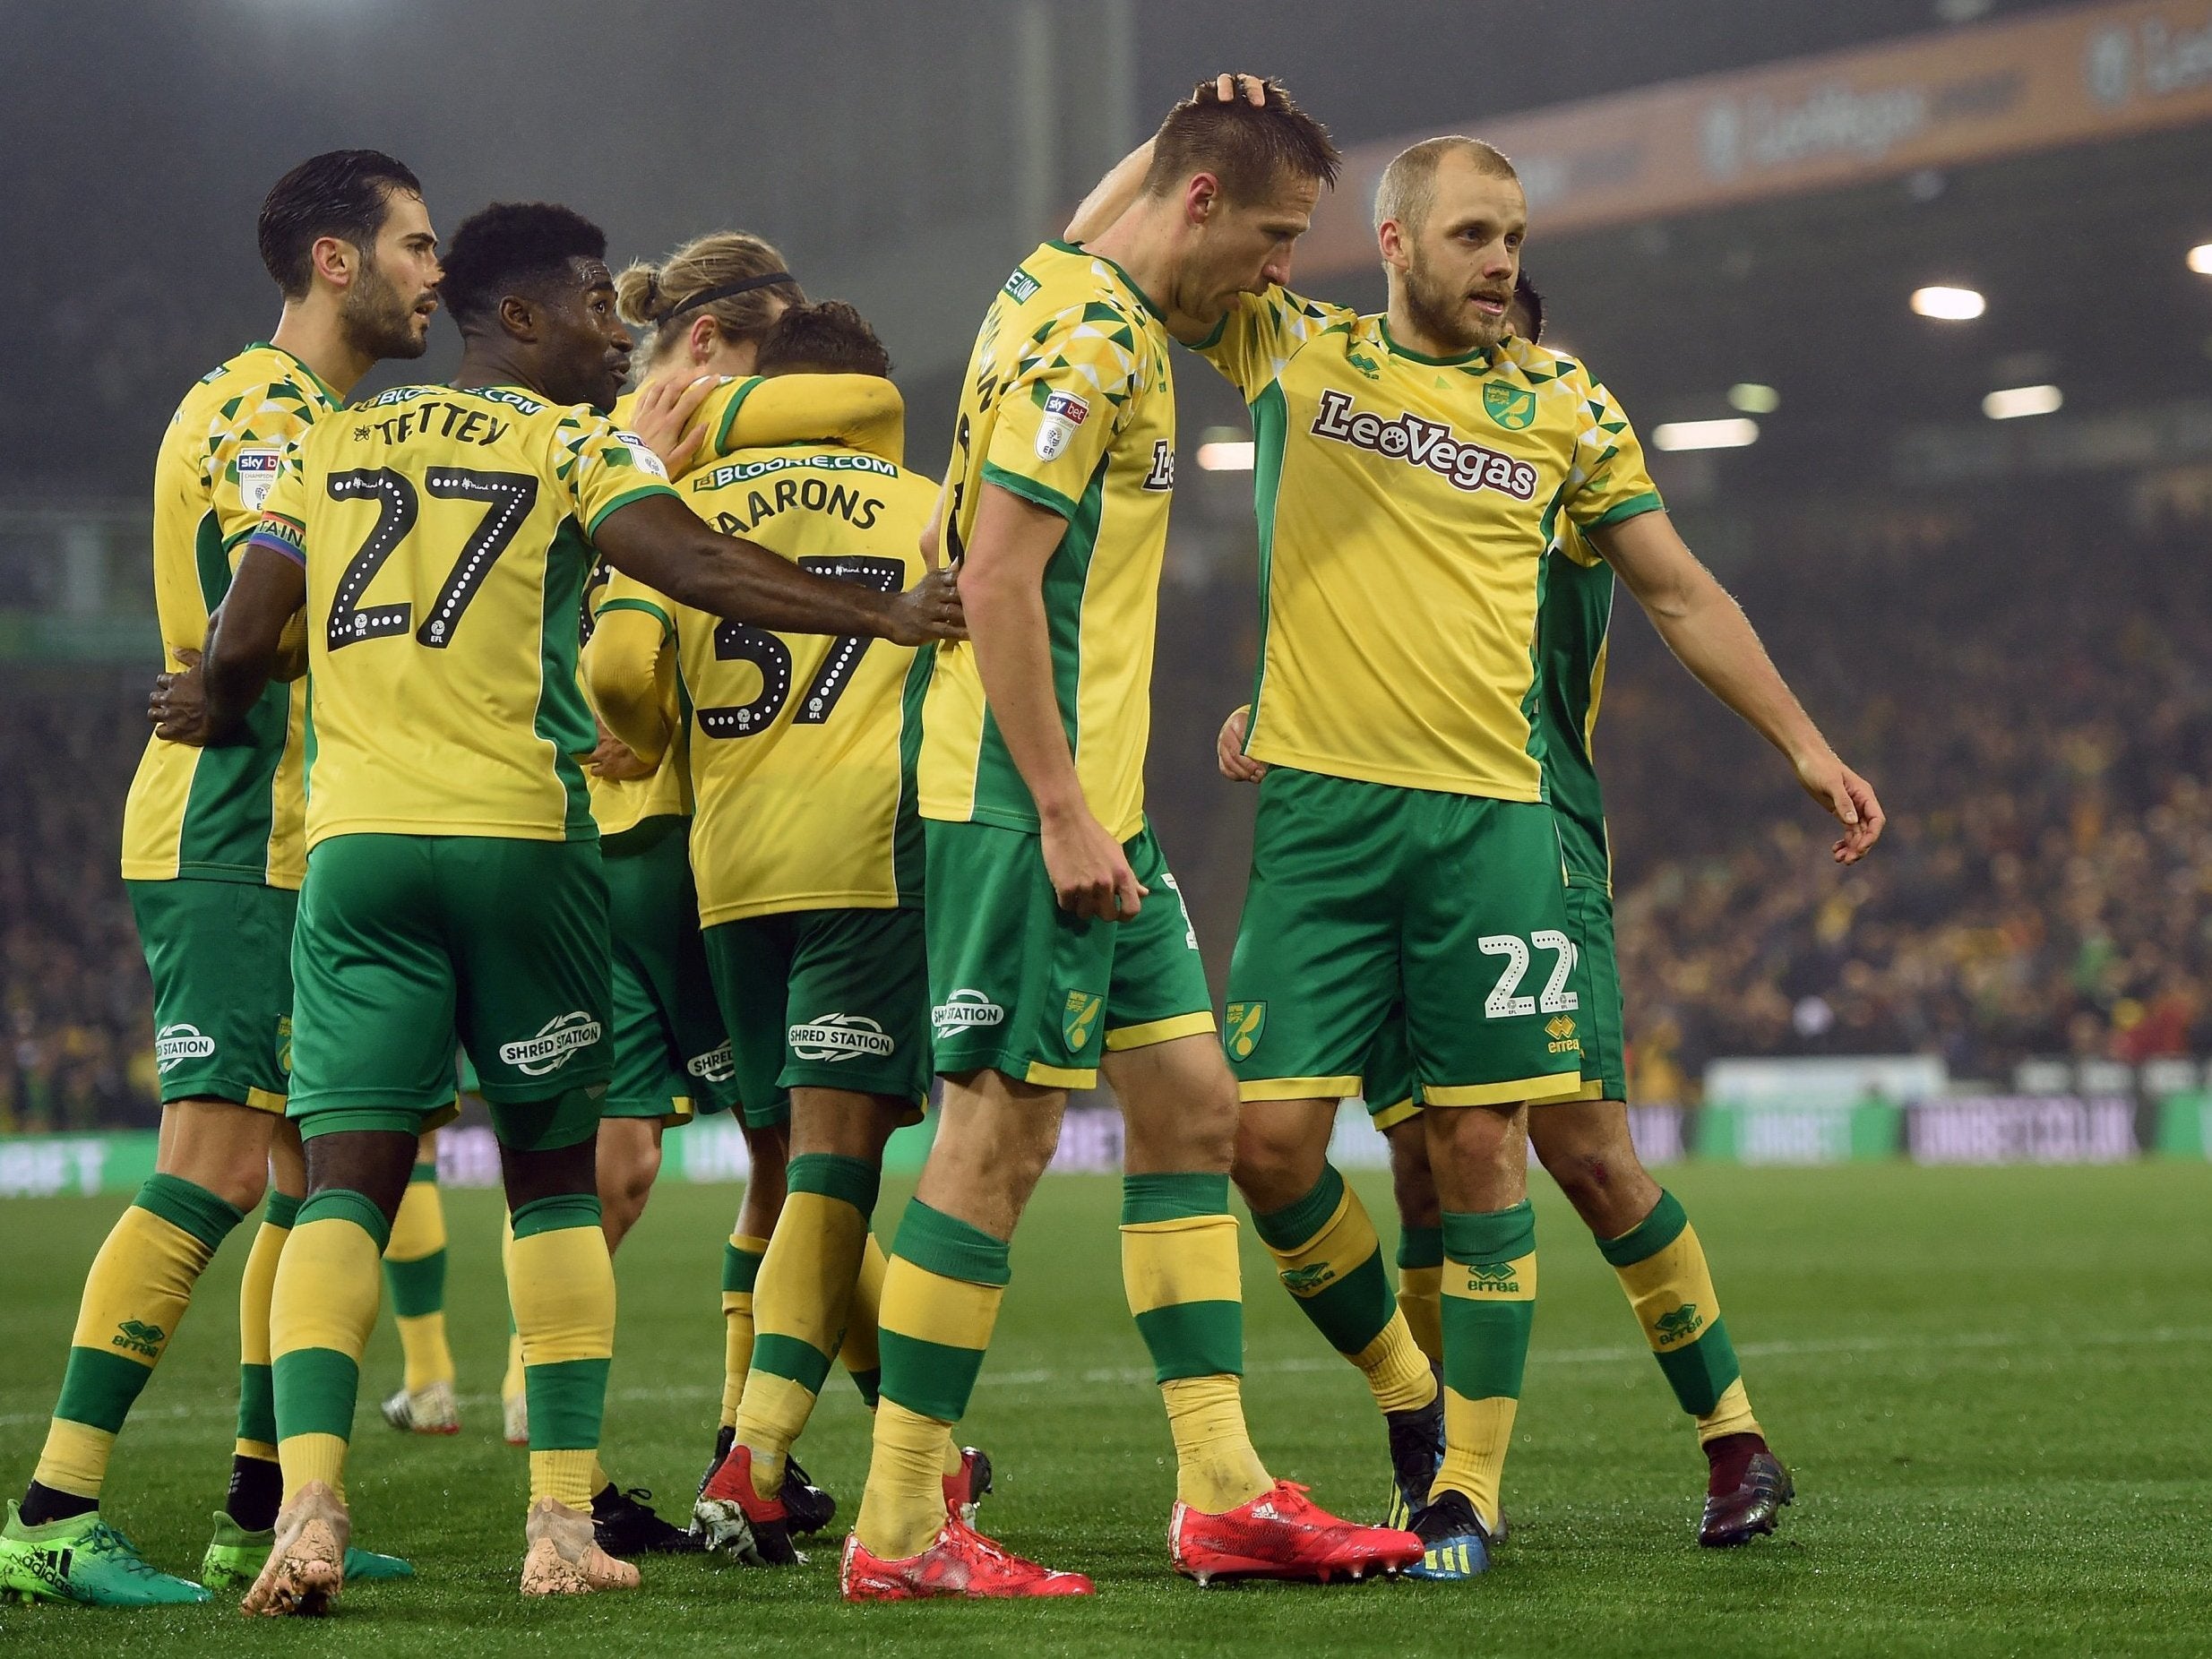 Norwich came from behind to beat Rotherham and stay at the top